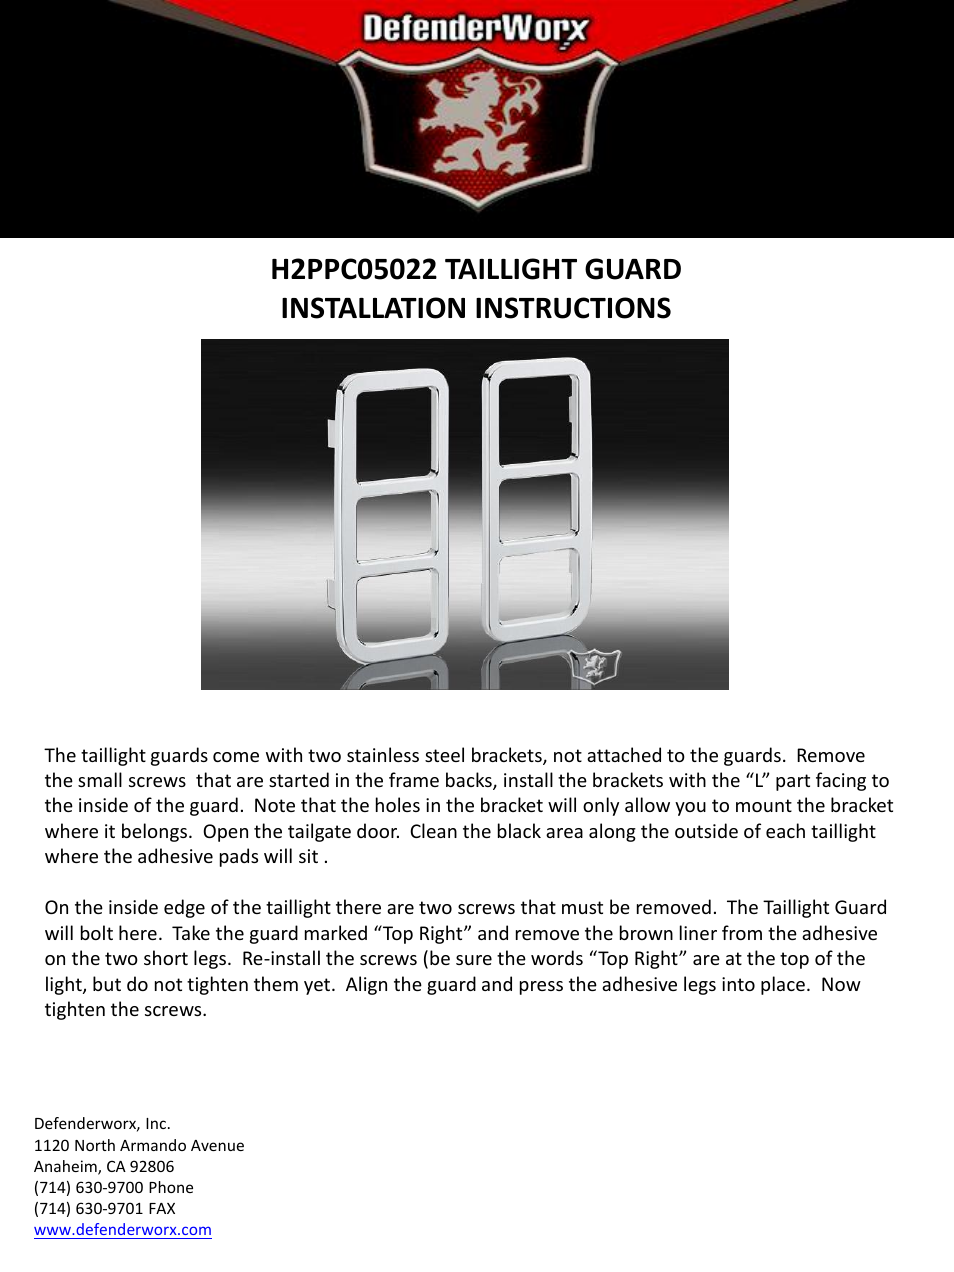 H2 TAILLIGHT GUARD